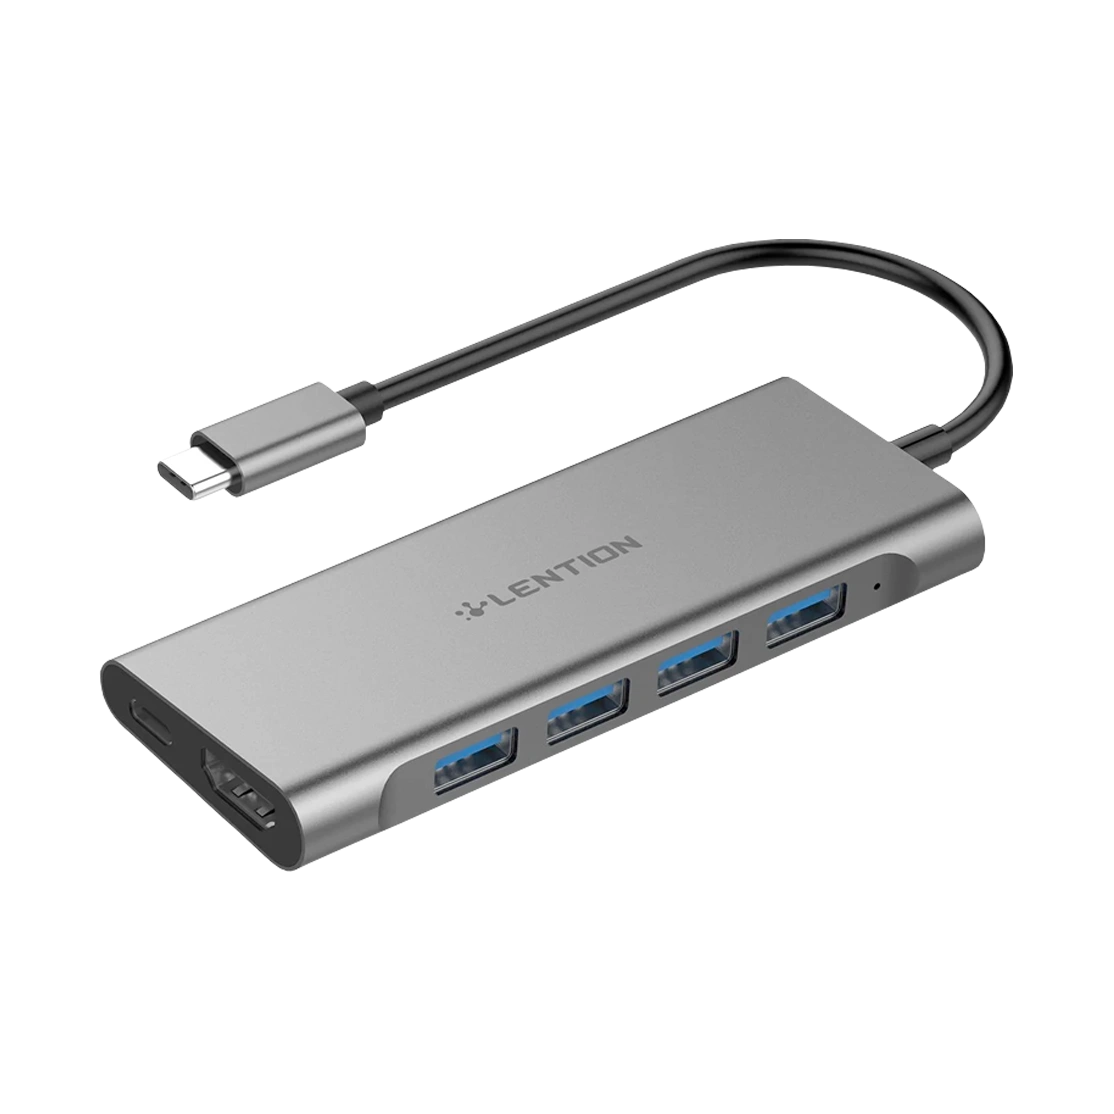 Lention USB-C to HDMI, USB and USB-C C35